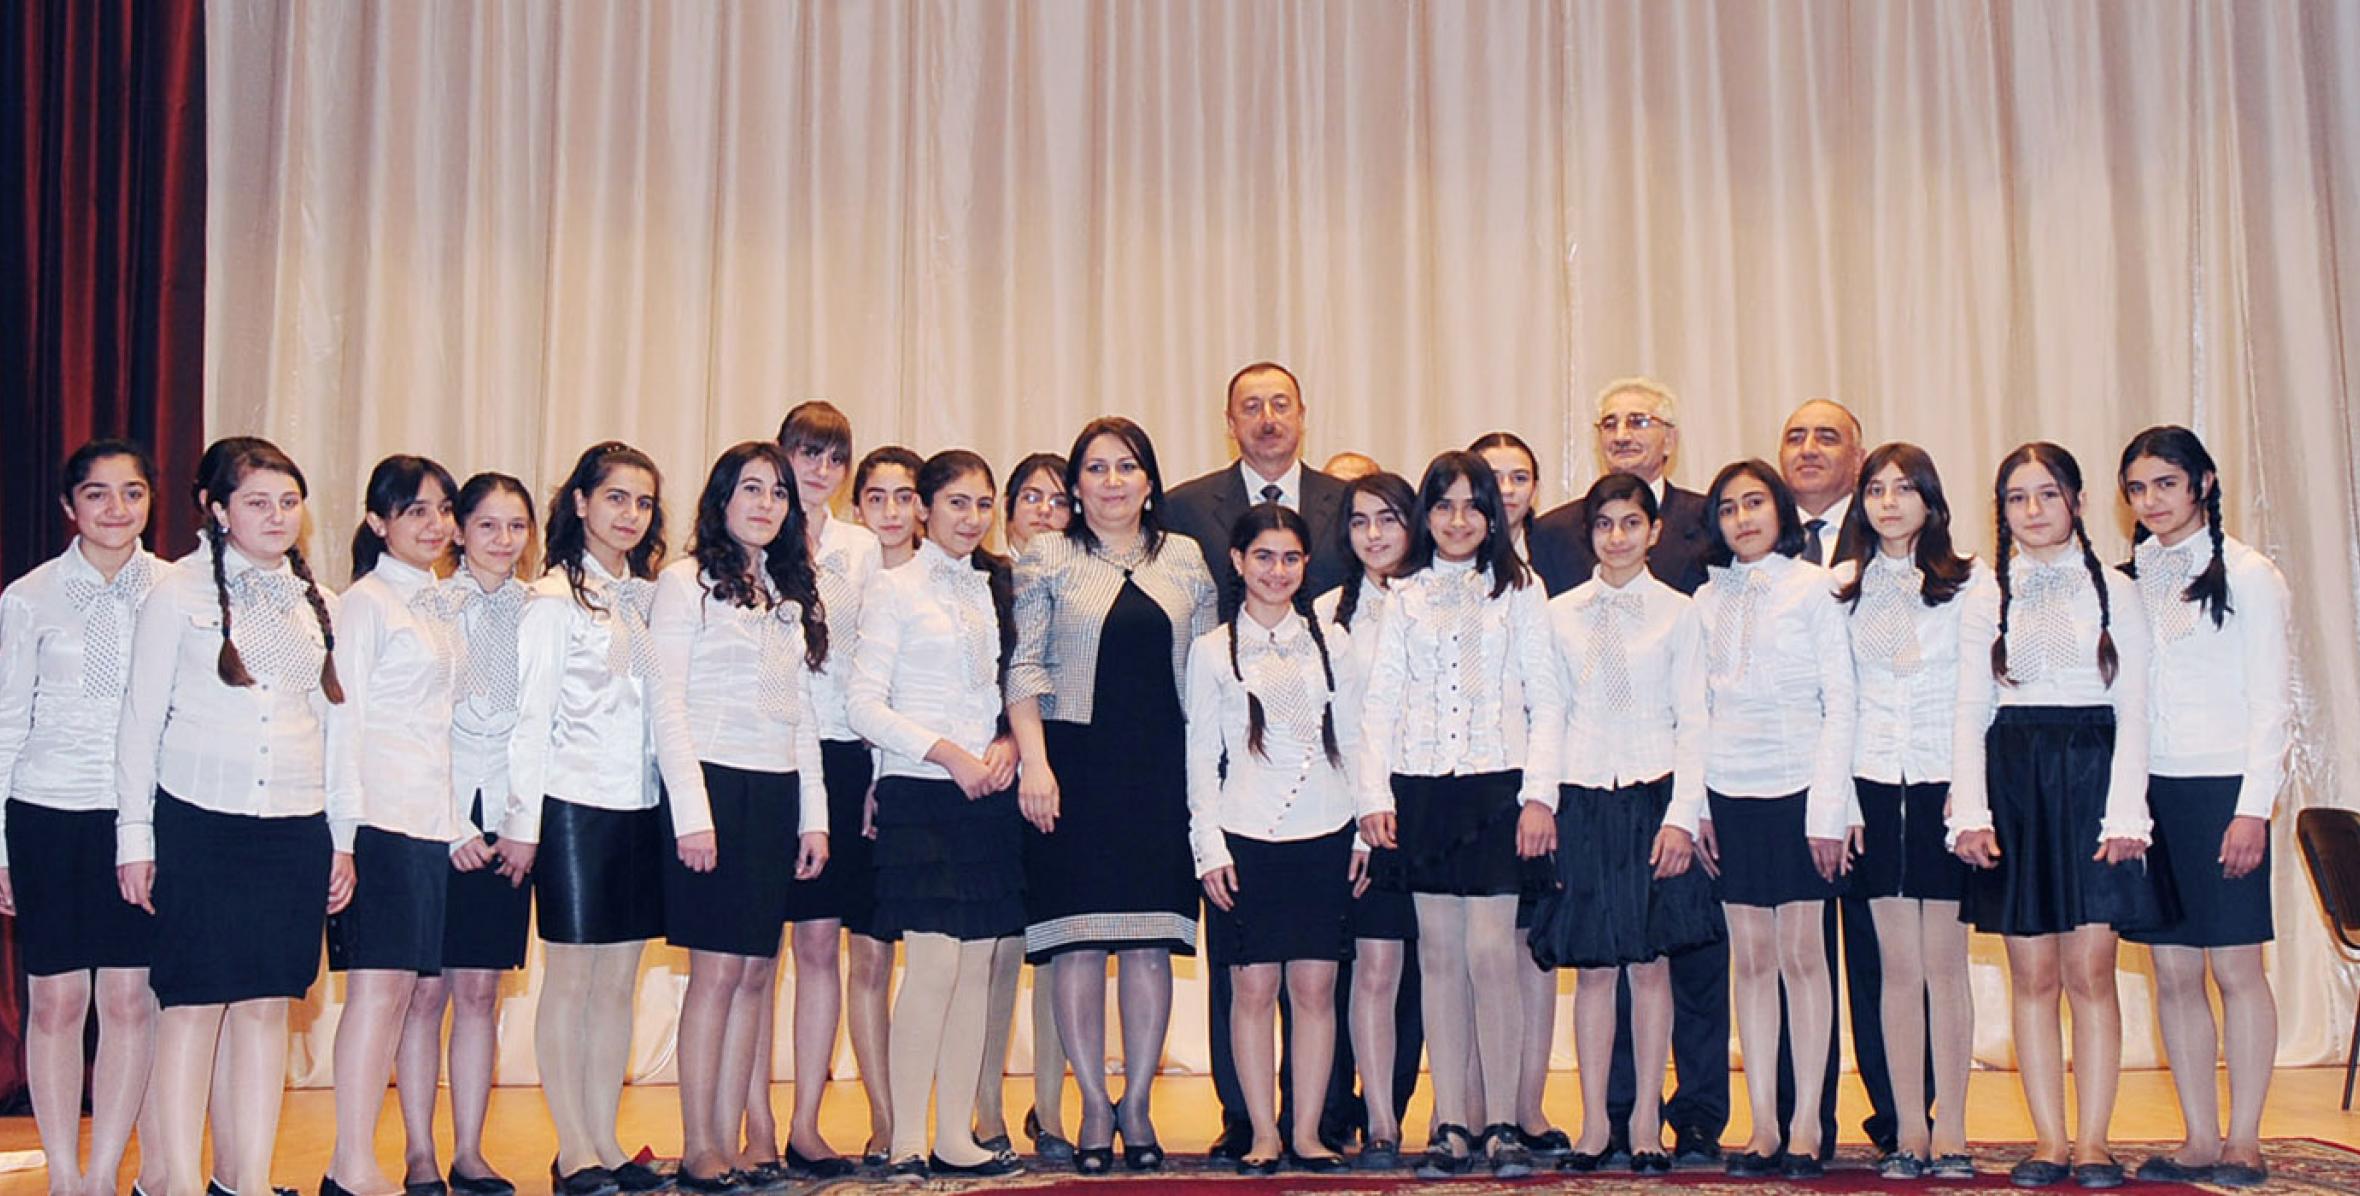 Ilham Aliyev participated at the opening of Cultural Activities House in Goranboy